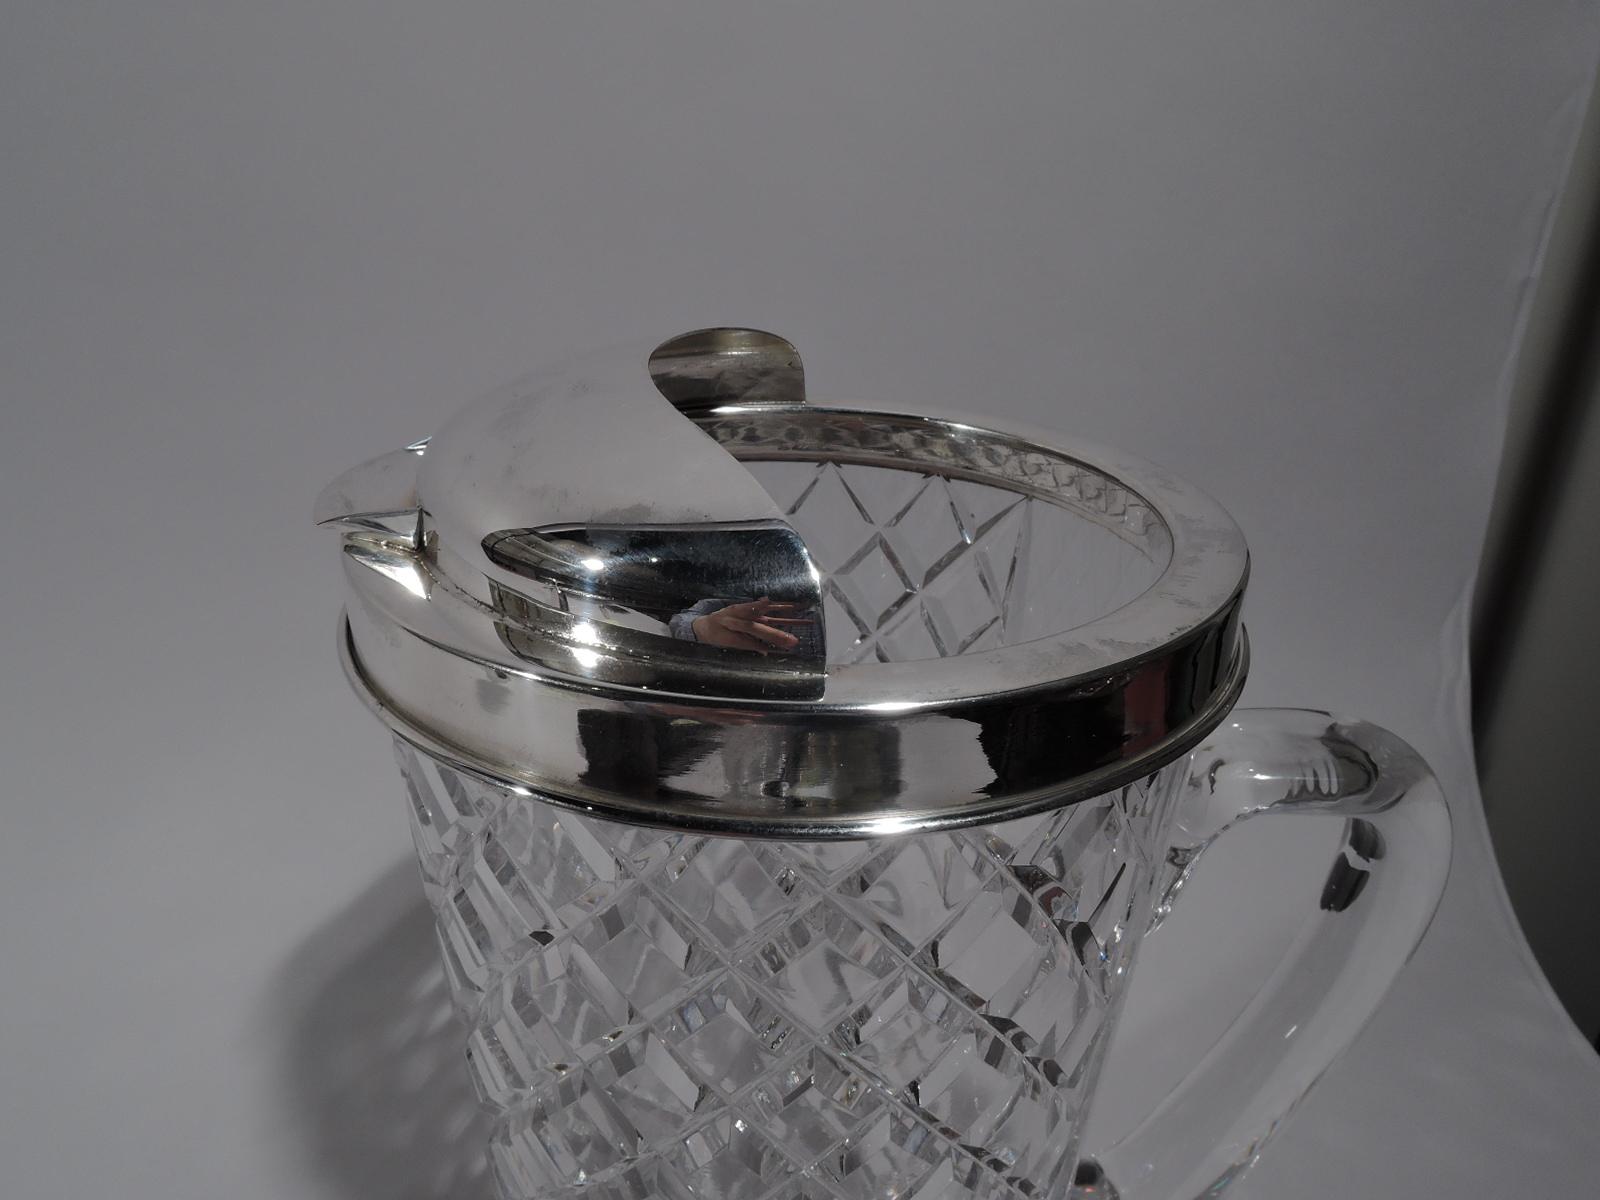 Mid-Century Modern sterling silver and glass bar pitcher. Retailed by Tiffany in New York. Clear glass with straight and tapering sides, and C-scroll handle. All-over raised diaper pattern except back, which is plain. Sterling silver collar with